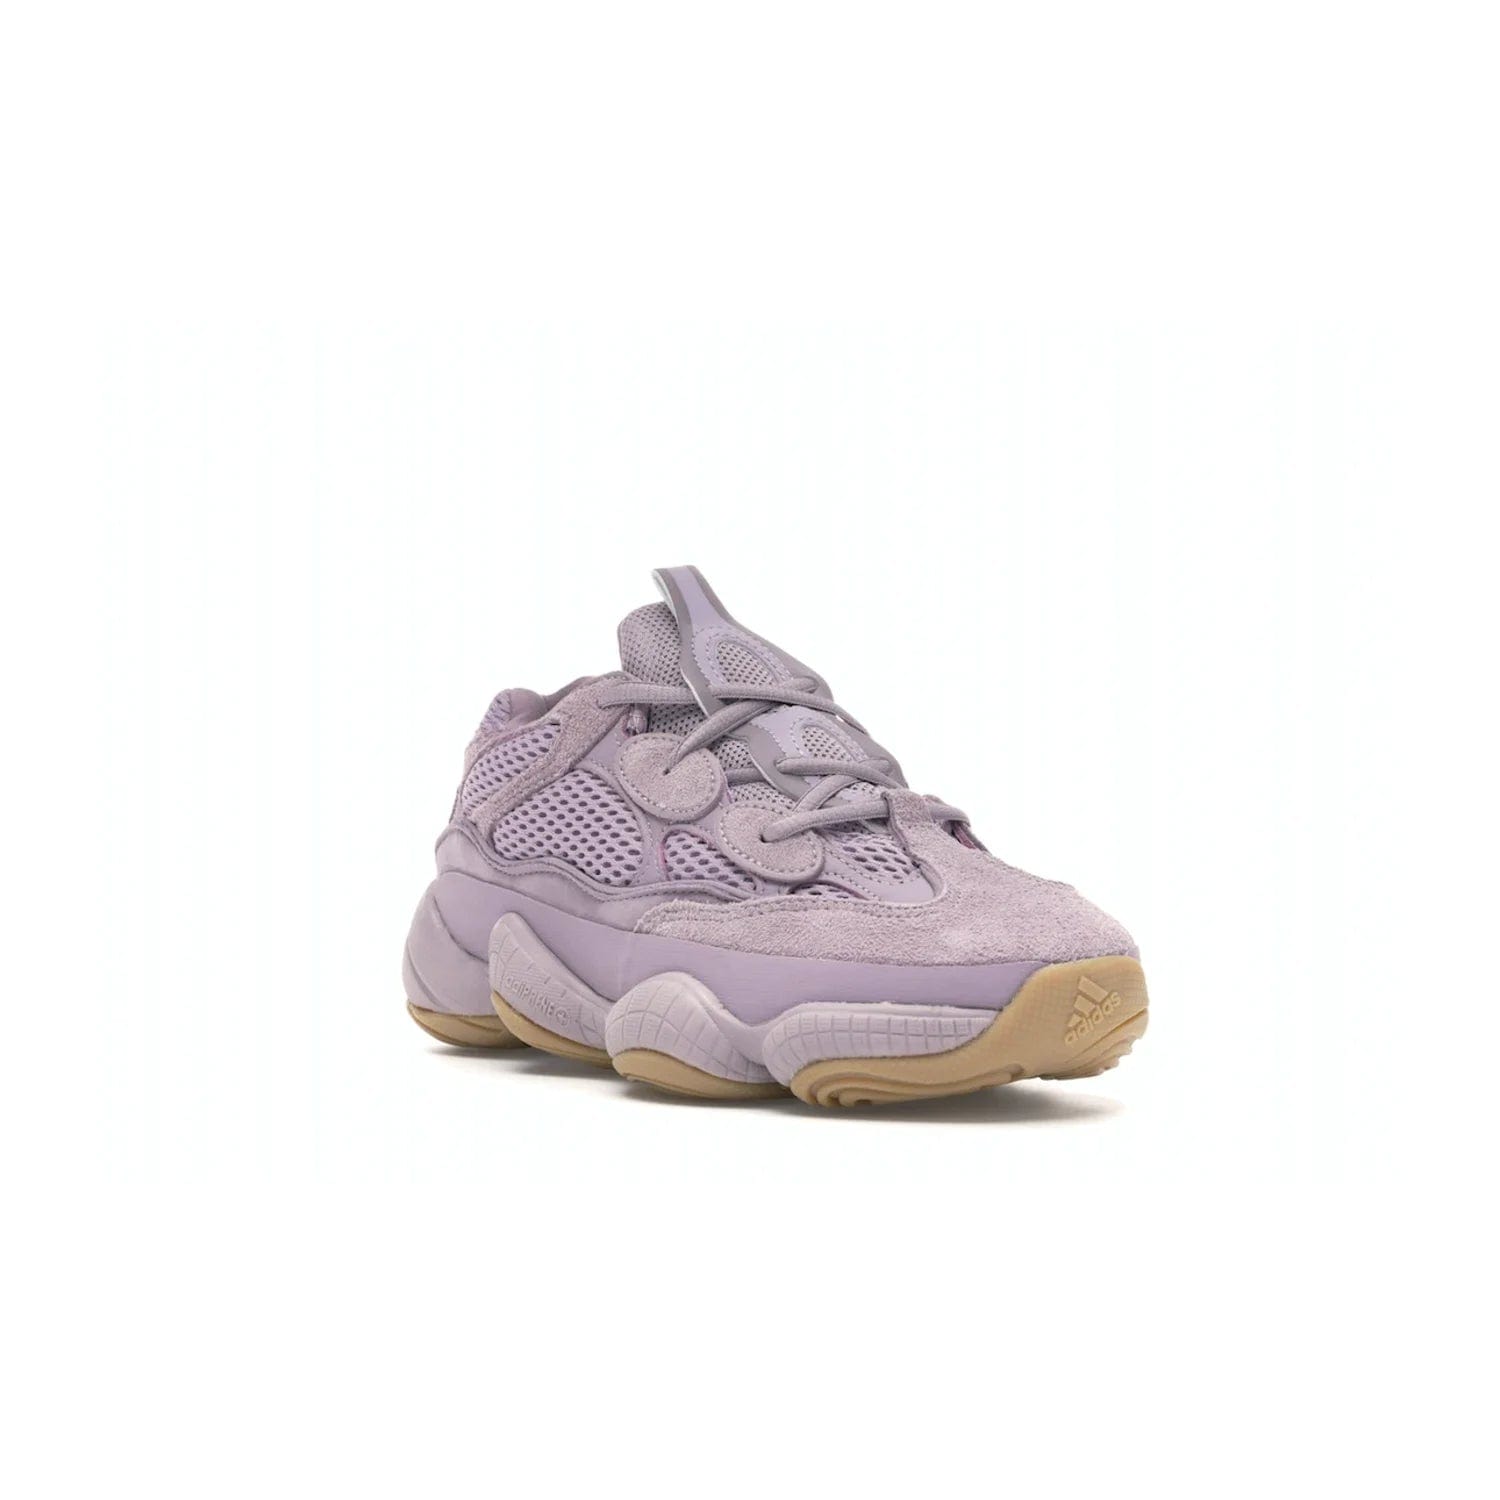 adidas Yeezy 500 Soft Vision - Image 6 - Only at www.BallersClubKickz.com - New adidas Yeezy 500 Soft Vision sneaker featuring a combination of mesh, leather, and suede in a classic Soft Vision colorway. Gum rubber outsole ensures durability and traction. An everyday sneaker that stands out from the crowd.